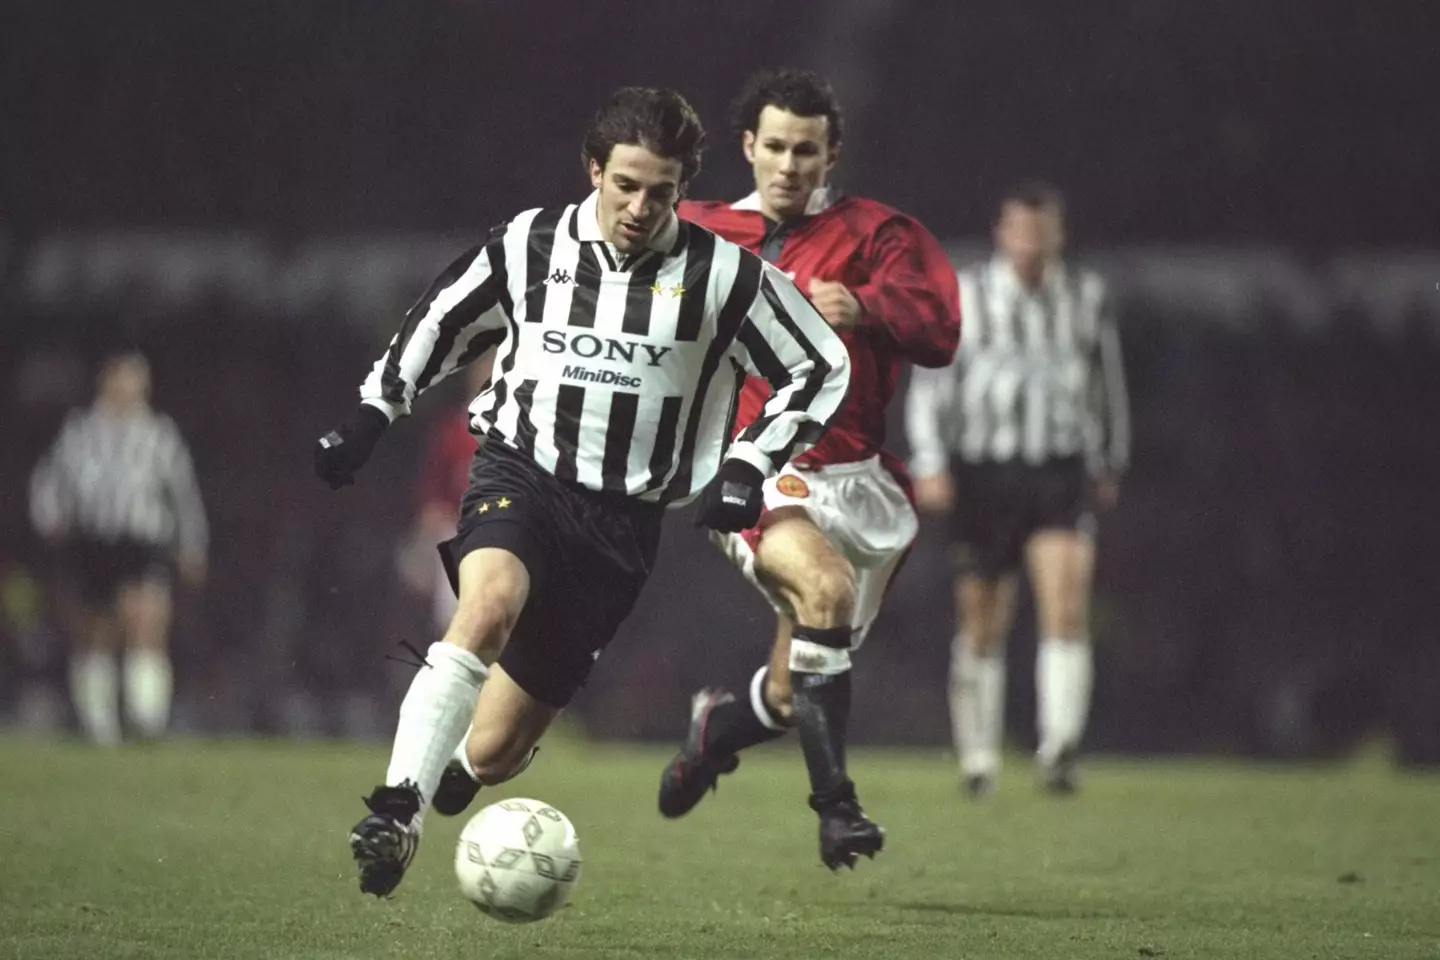 Alessandro Del Piero in action for Juventus against Manchester United. Image: Getty